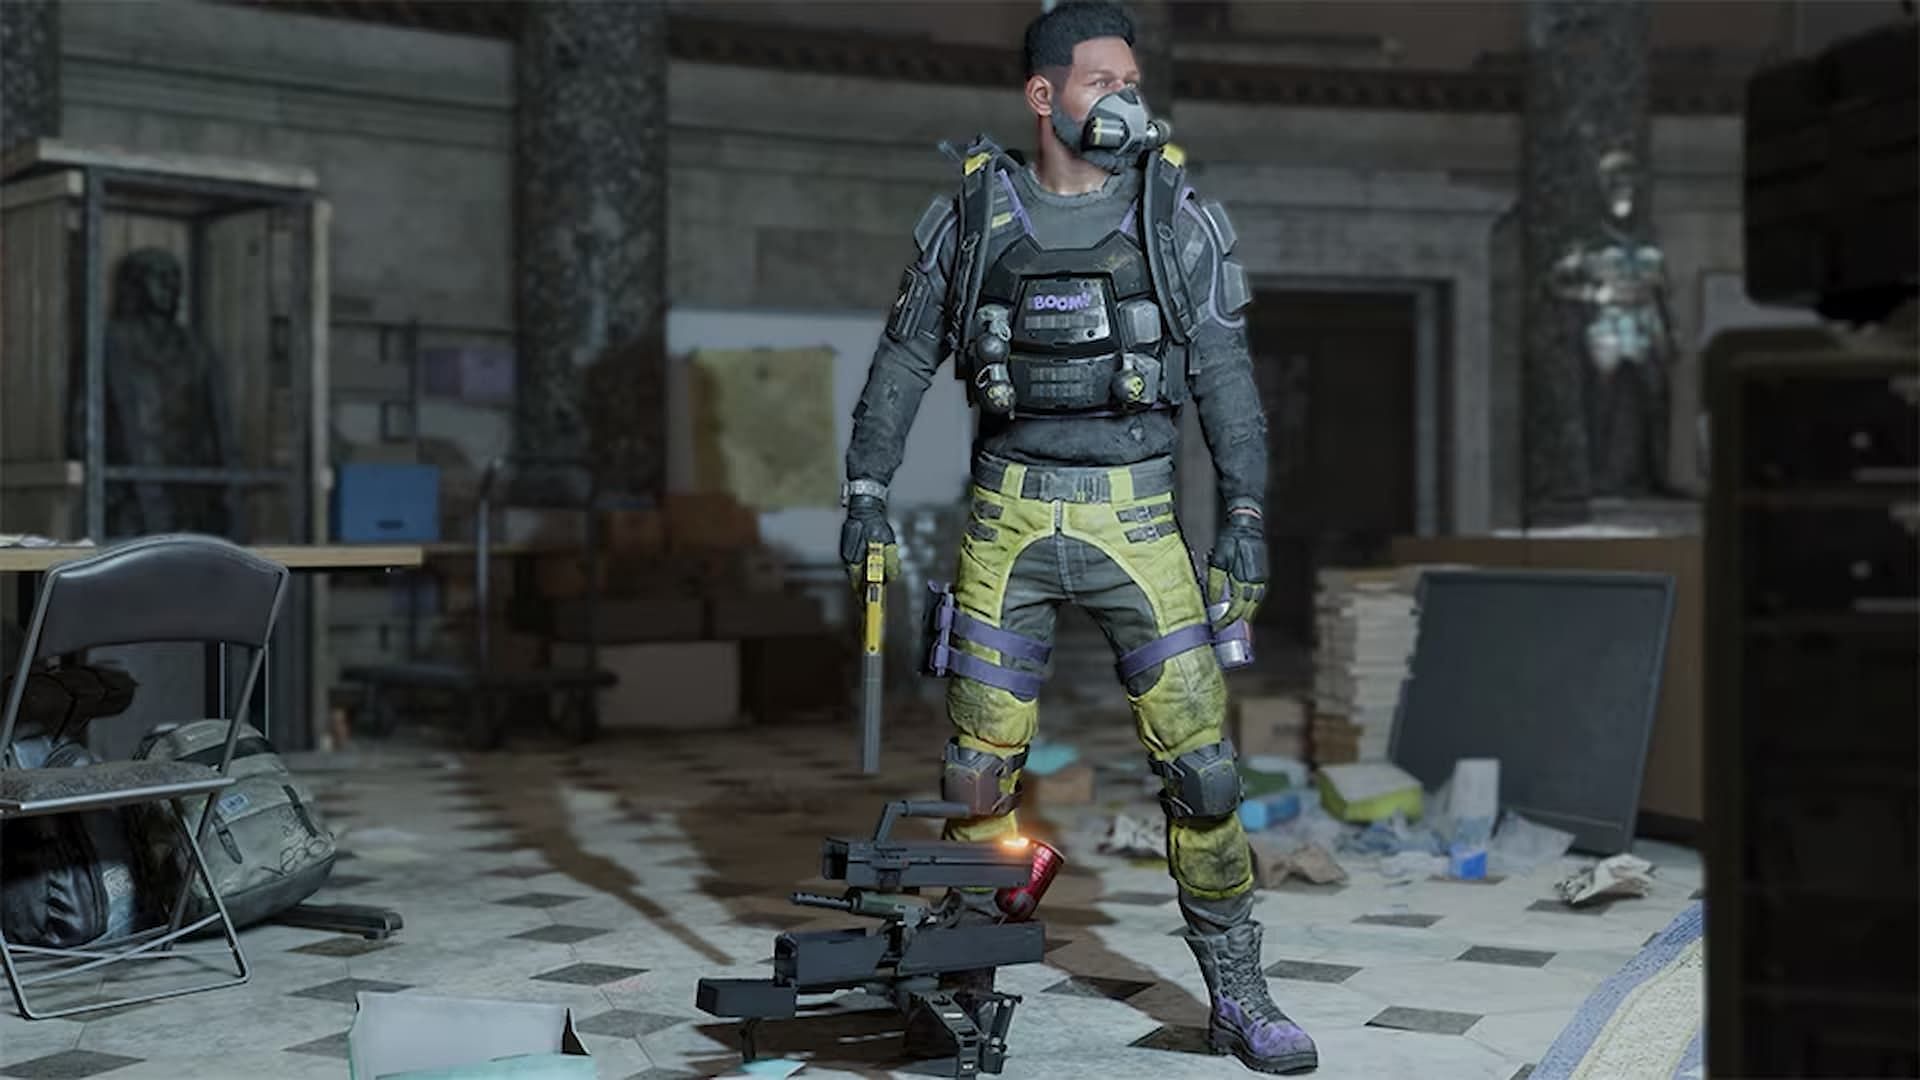 The Exuro Gear Set in The Division 2 (Image via Ubisoft)